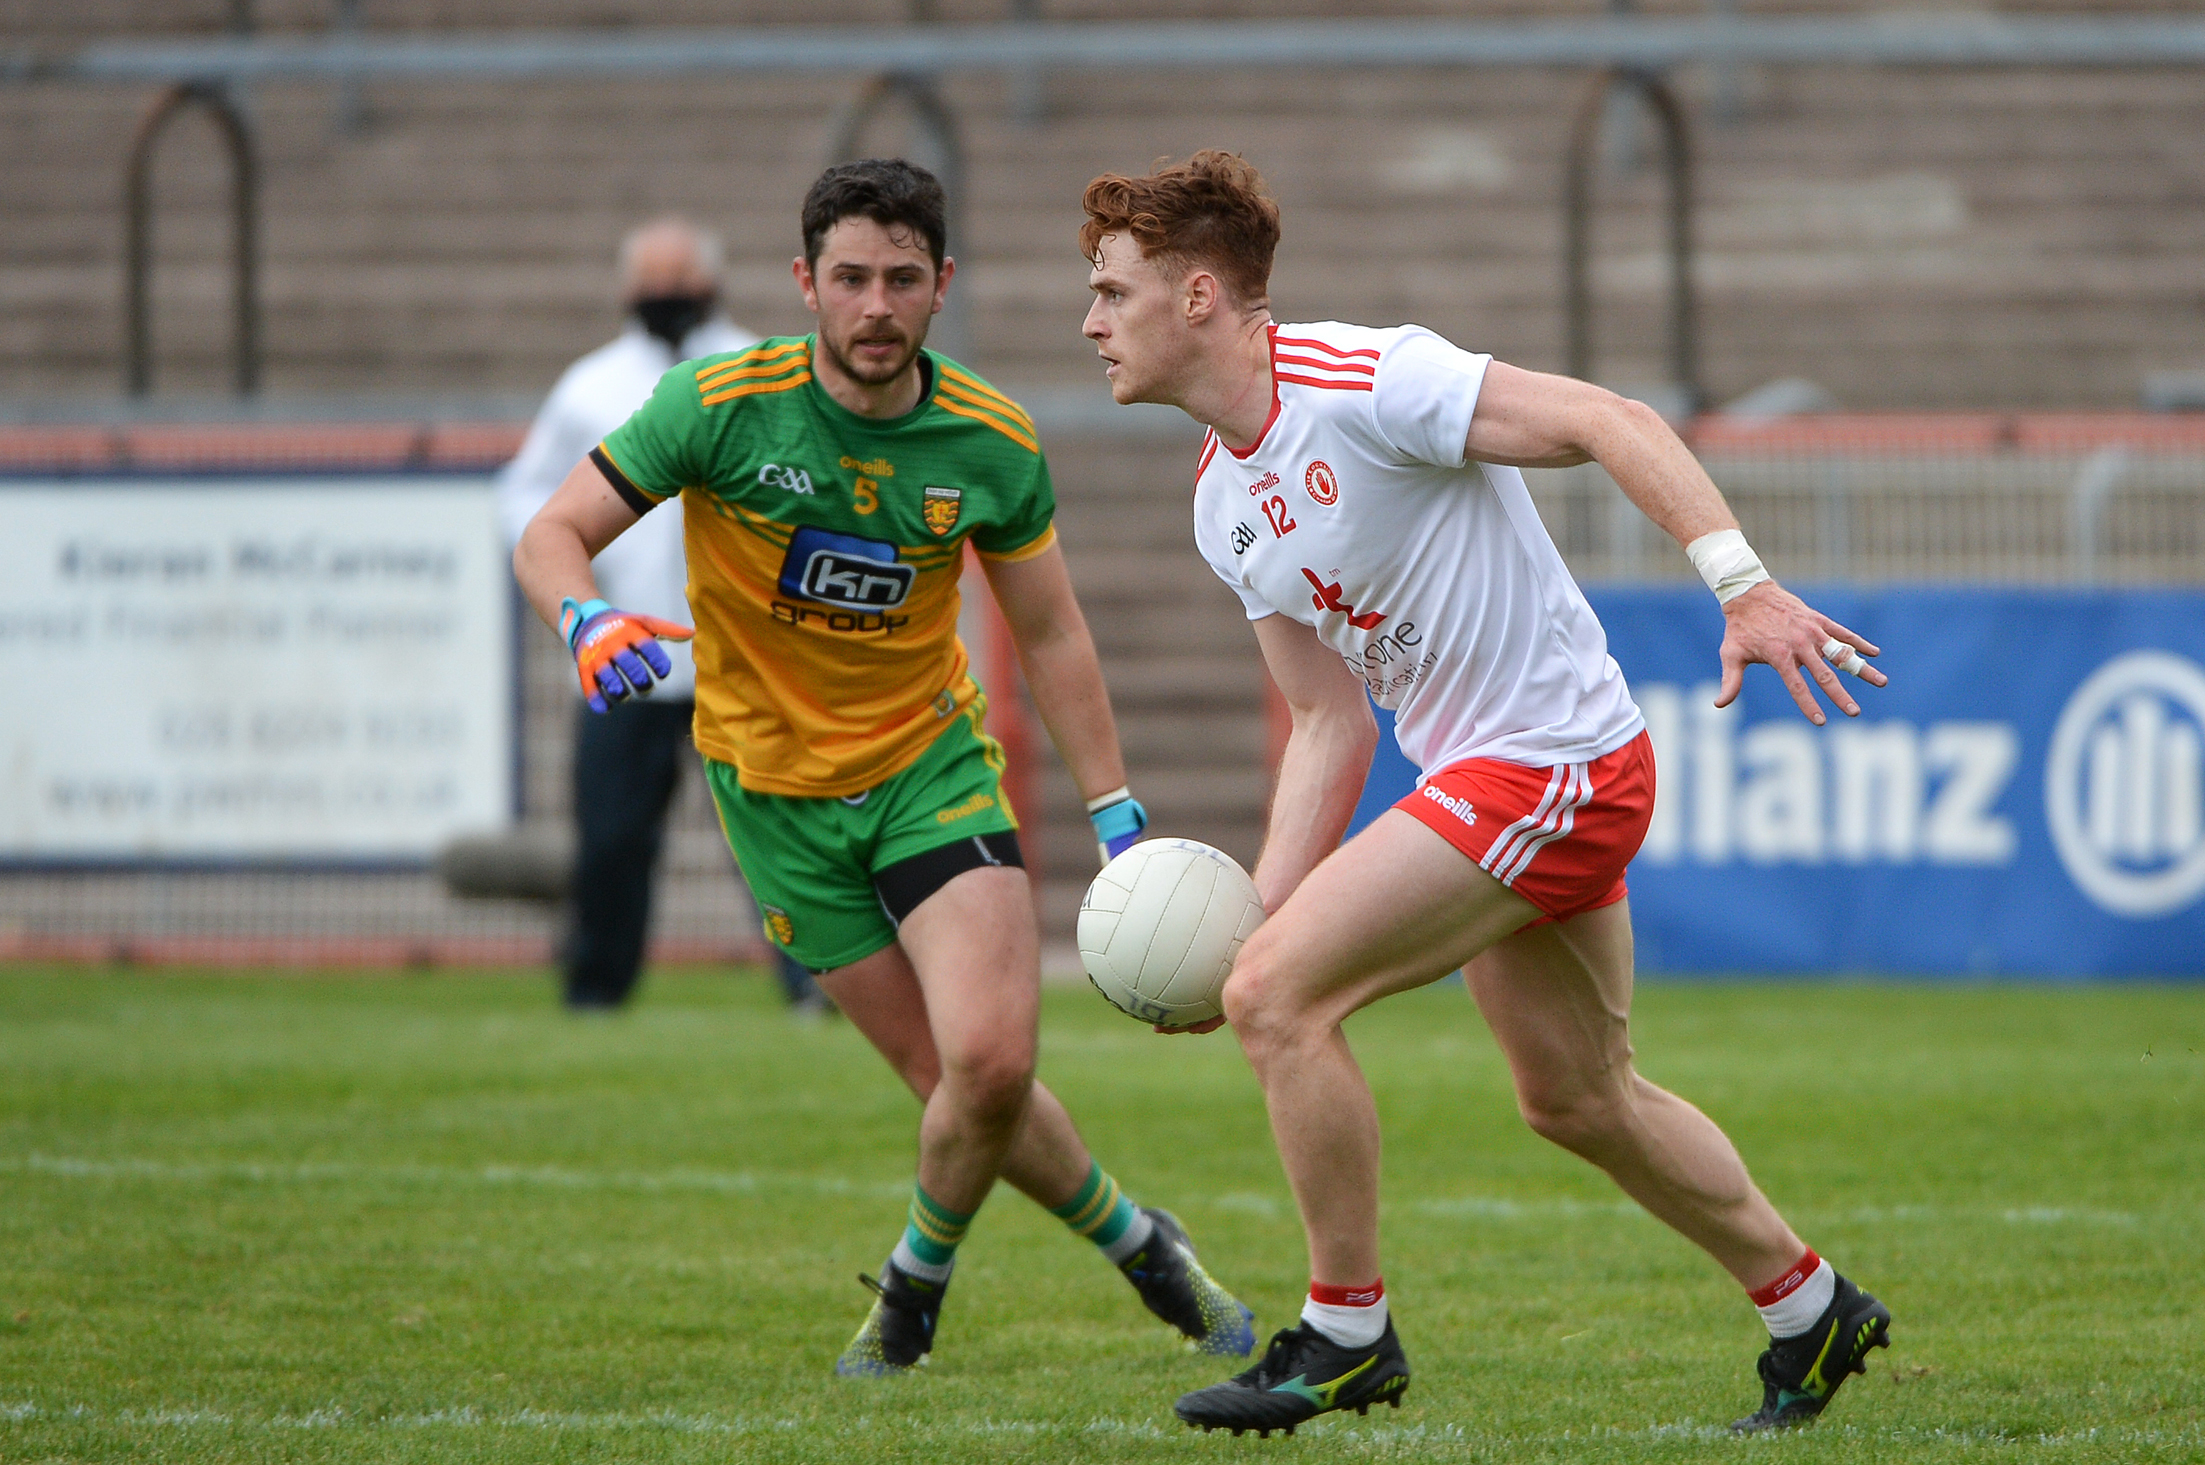 14-man Tyrone fall short against impressive Donegal